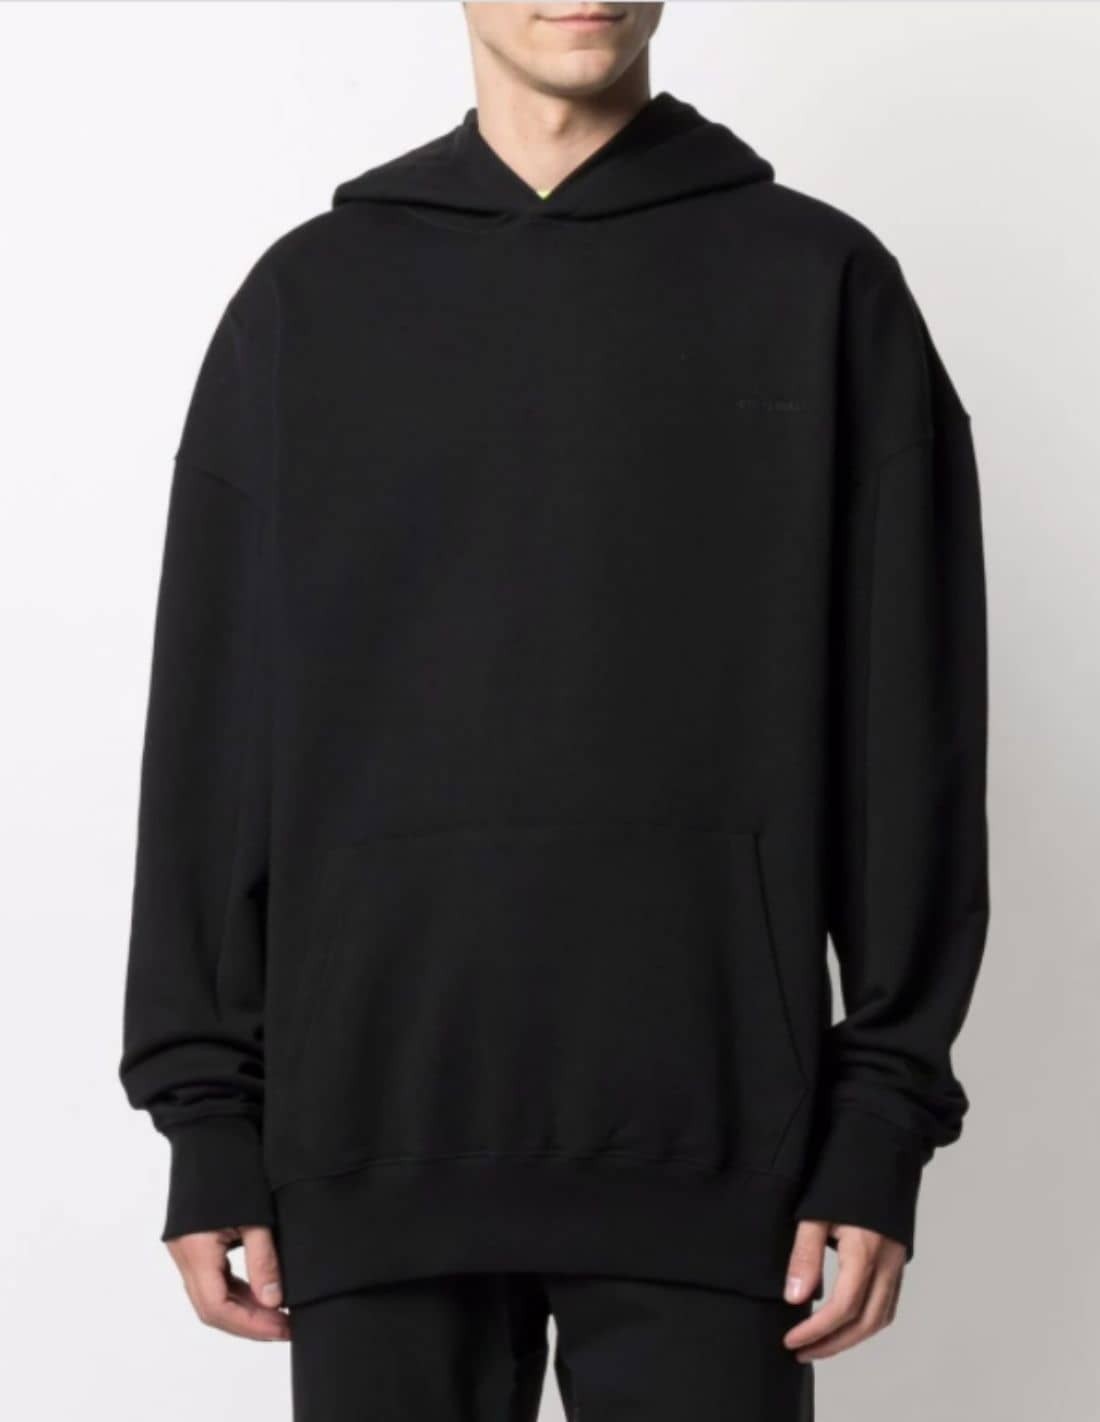 A-COLD-WALL black oversized sweatshirt with big patch logo for men - SS21